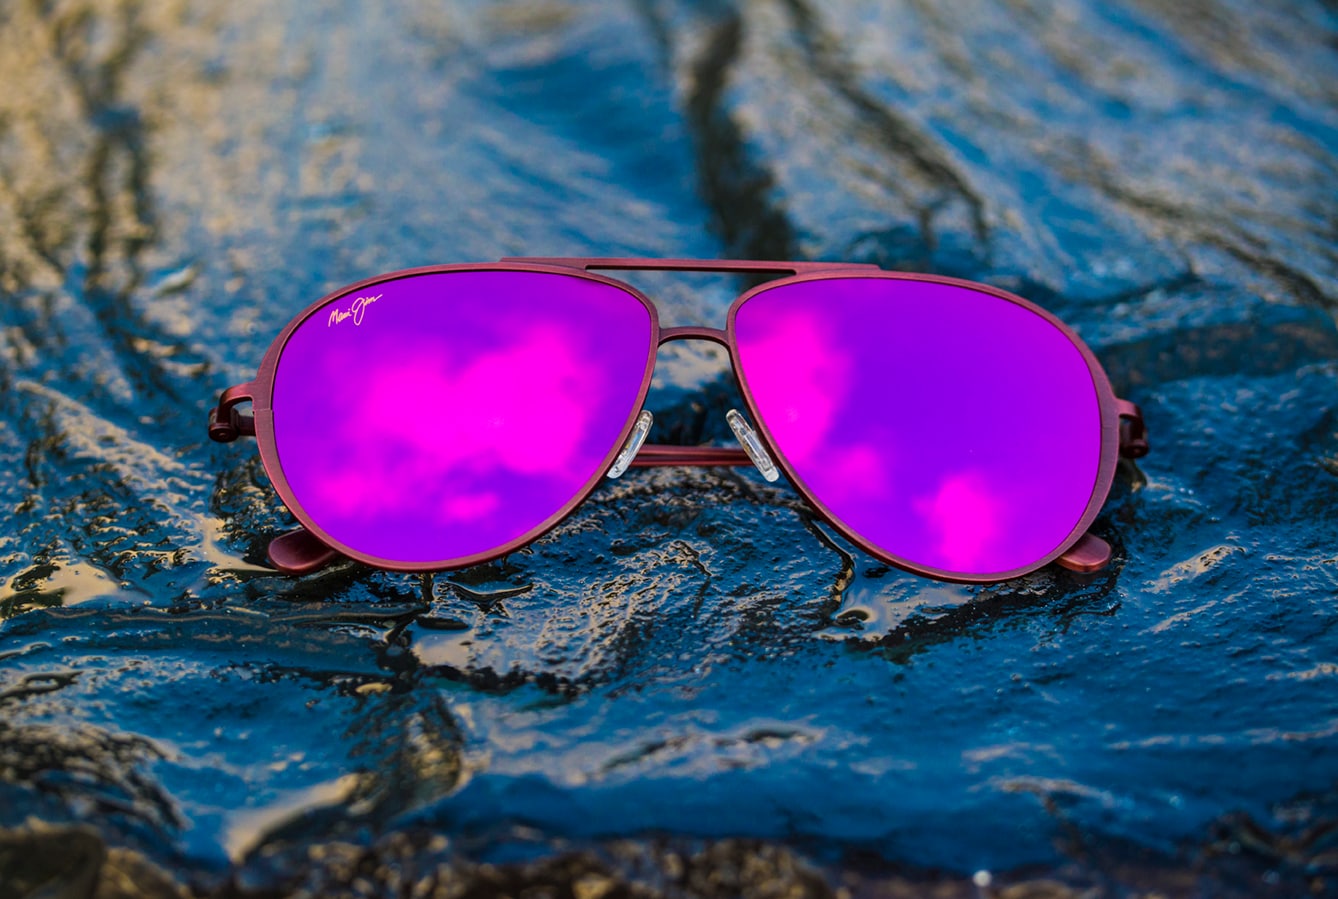 shallows style sunglasses with pink lenses displayed over wet rocks